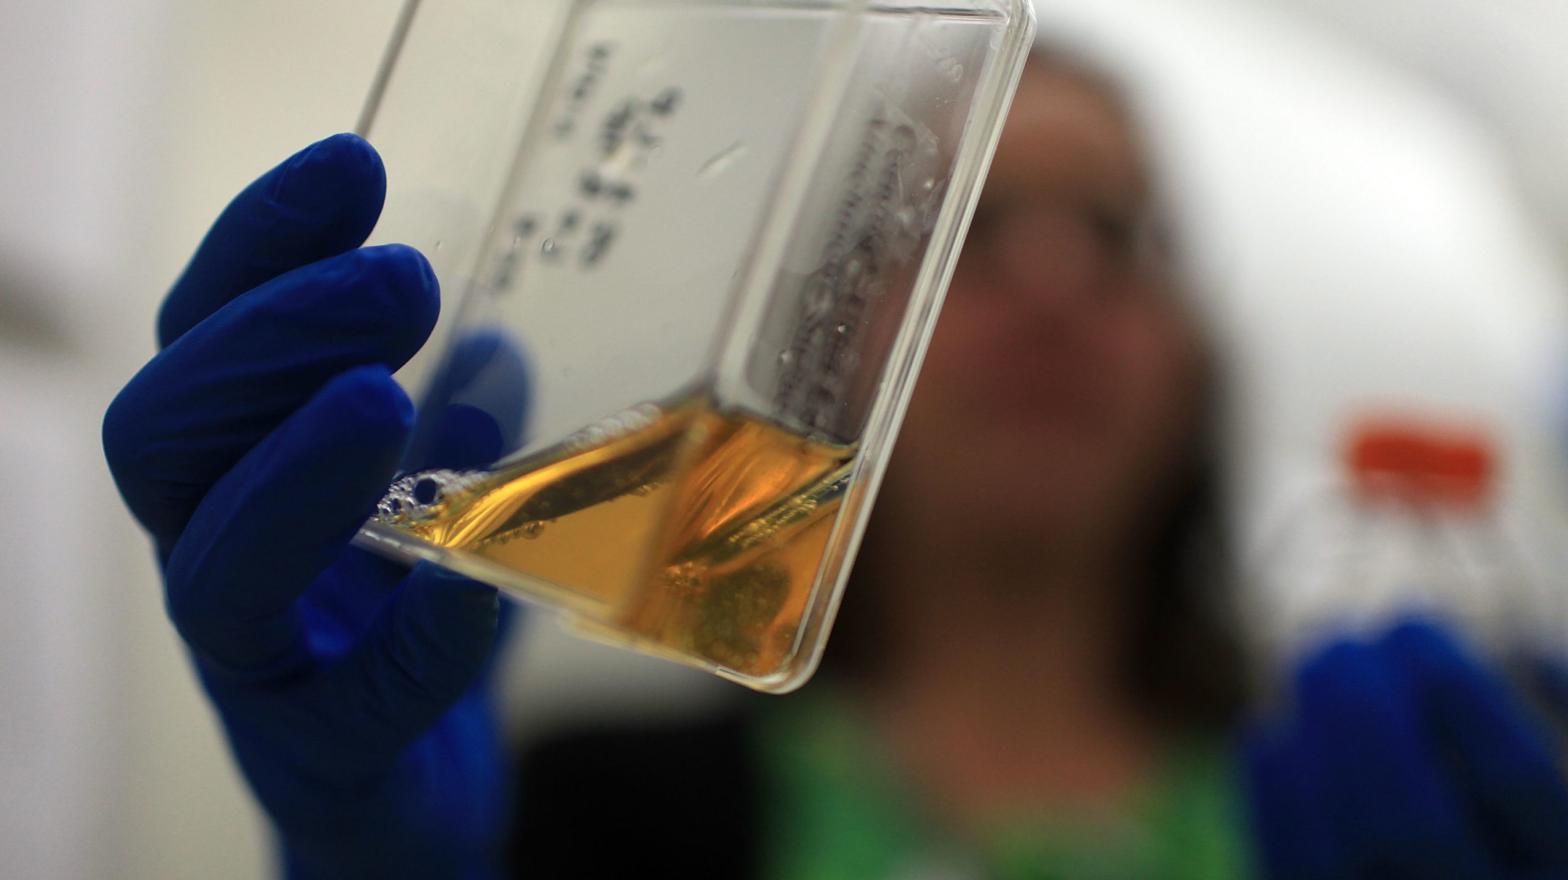 A researcher holding up a container of stem cells. (Photo: Spencer Platt, Getty Images)